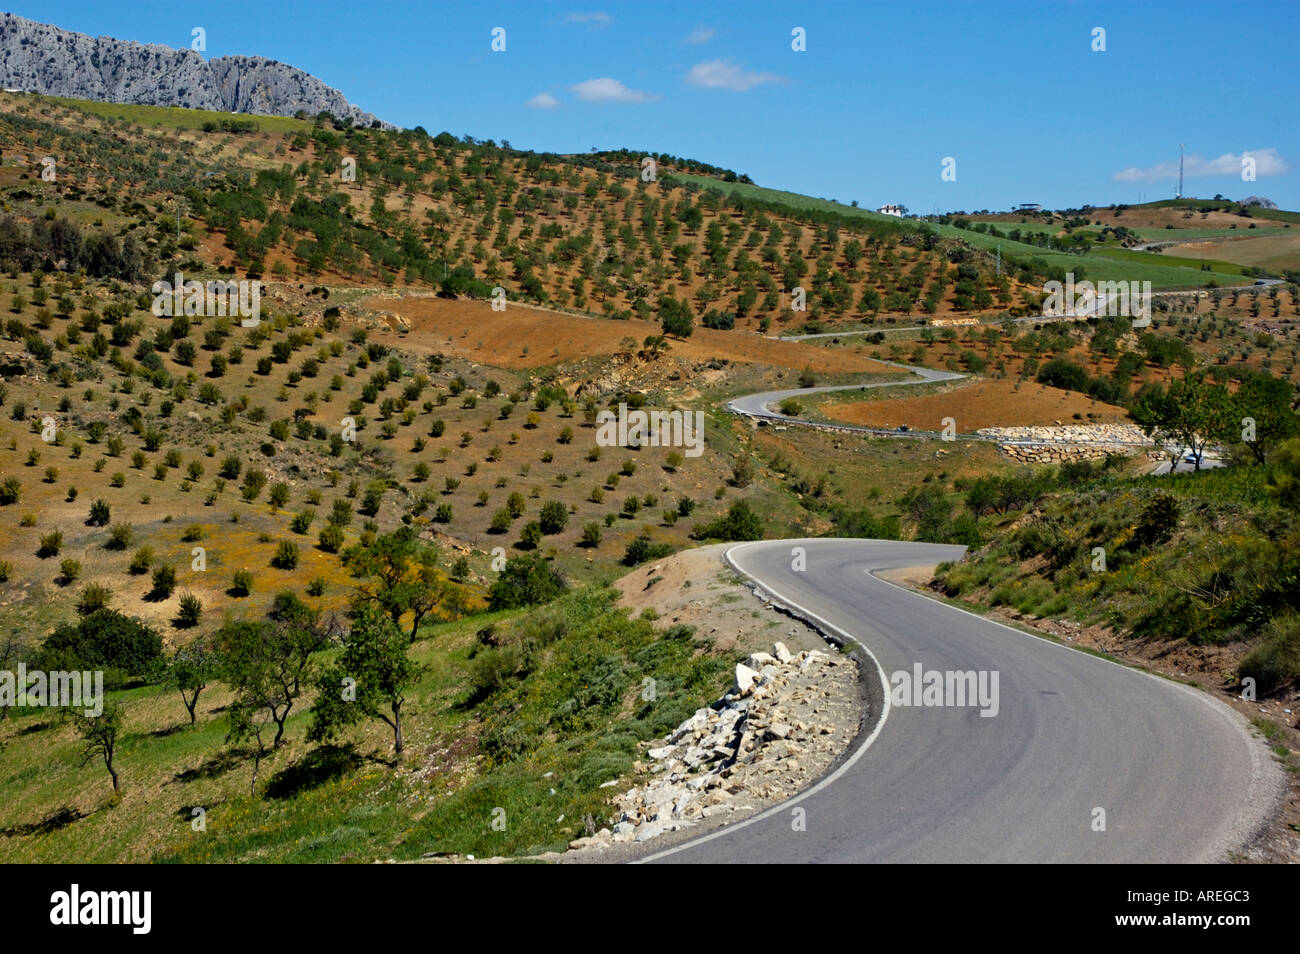 Andalucia, Spain countryside : Road winding between fields of olive trees, between the villages of Alora and Antequera, Andalusia Stock Photo